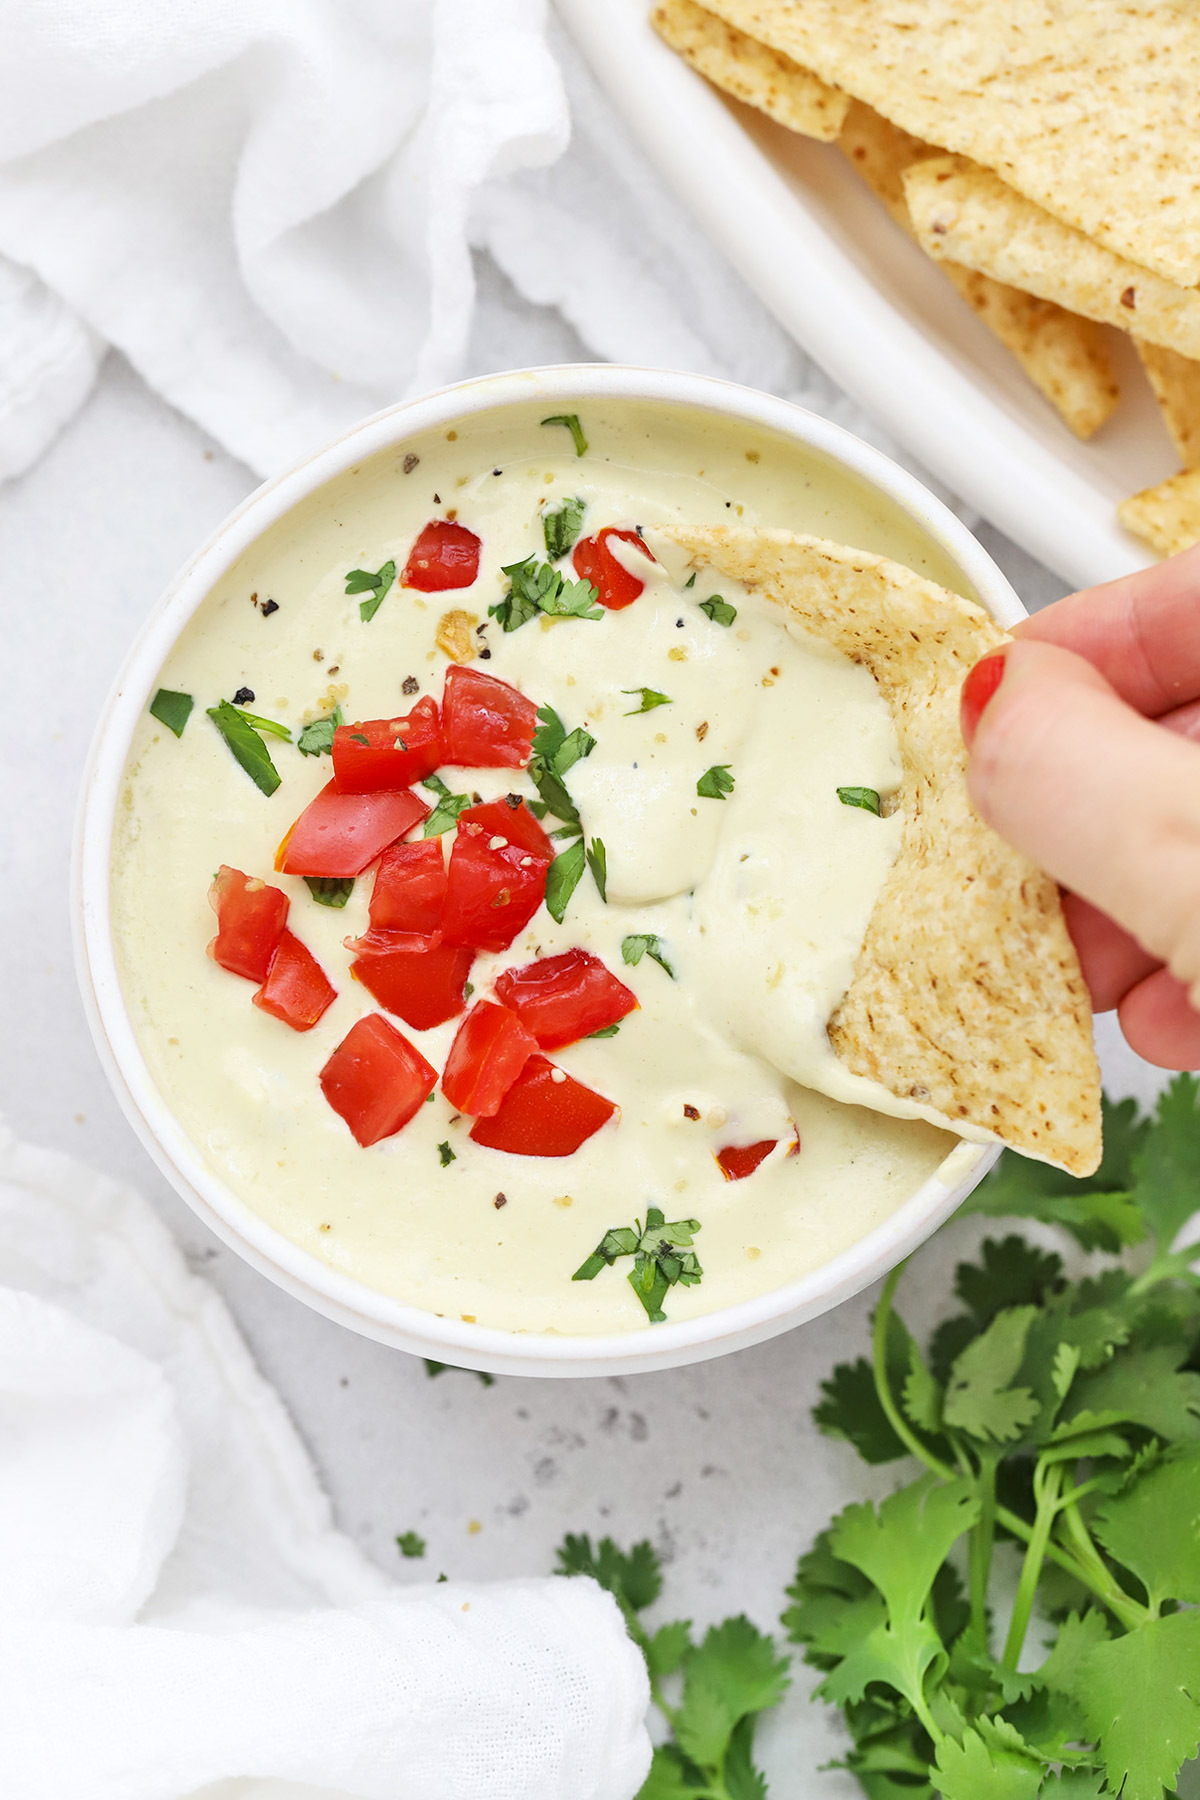 A tortilla chip dipped into a bowl of white cashew queso dip topped with chopped tomato and minced cilantro